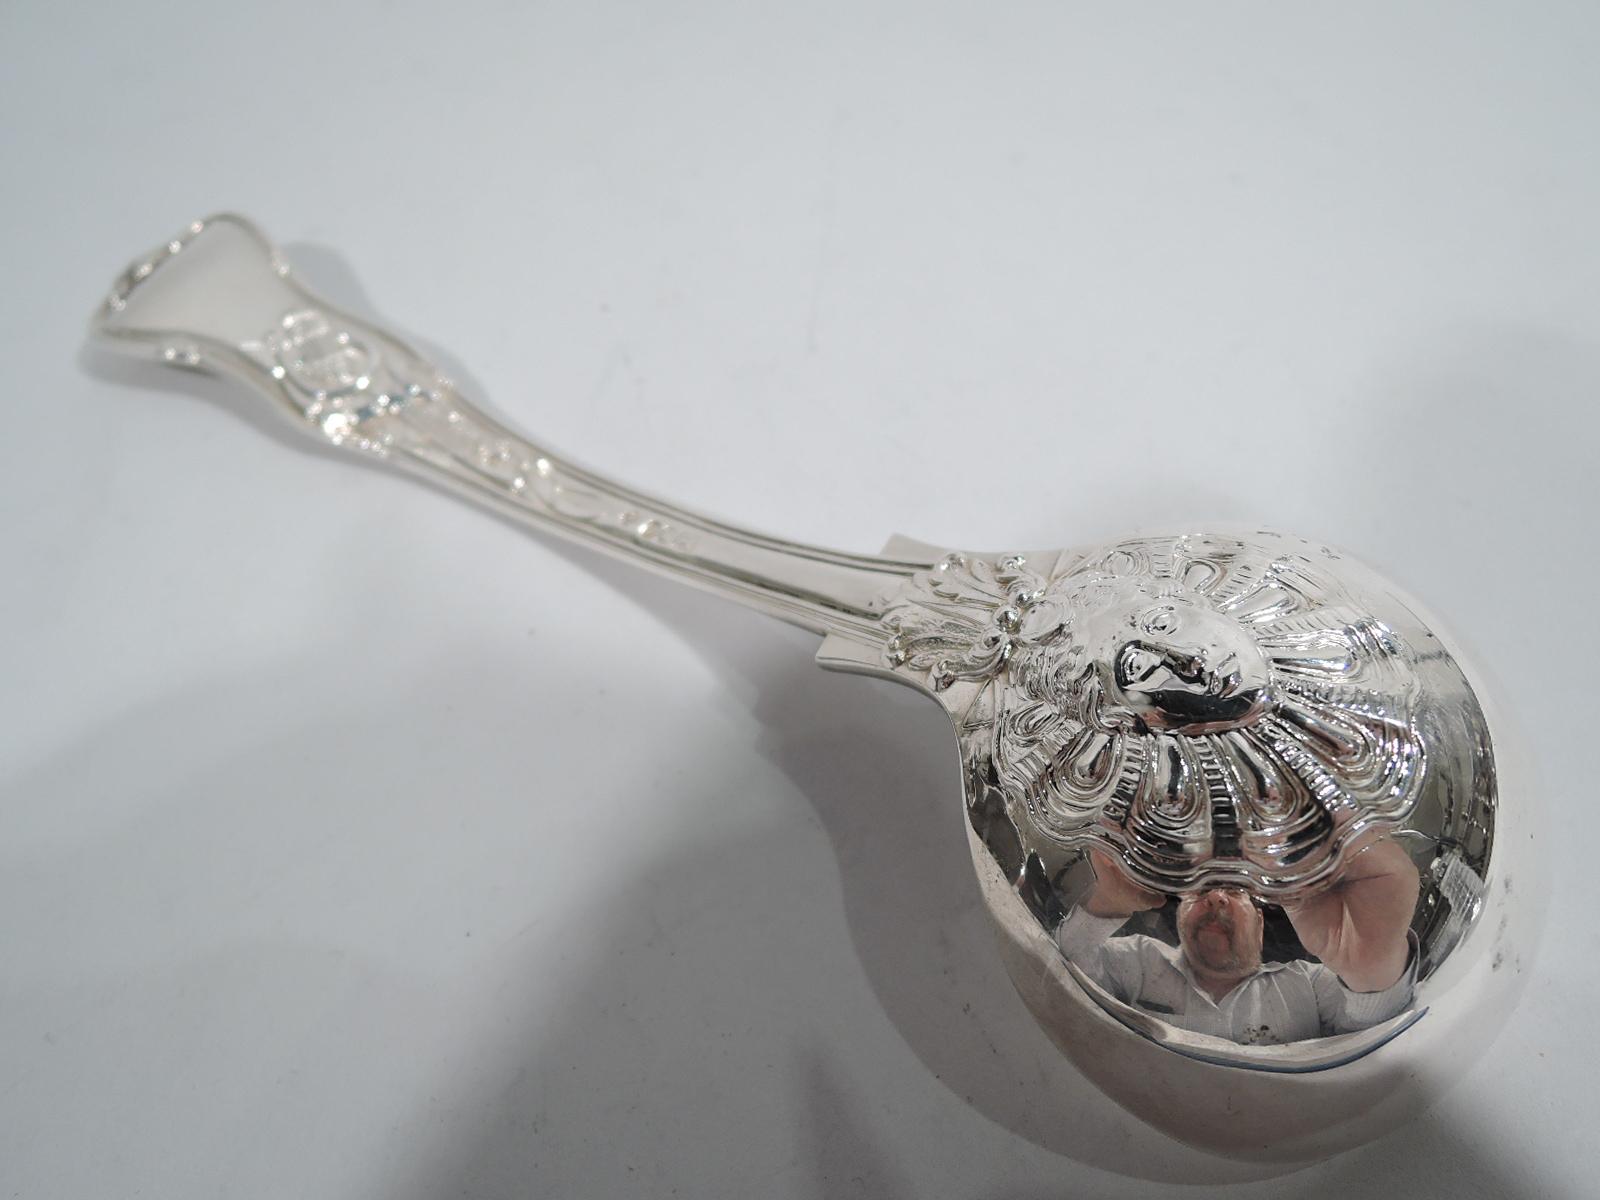 English Victorian sterling silver ladle, 1997. Round bowl mounted to cast King’s-shaped handle with shell terminal. The hounds run single file up the handle to the stag that is trapped by more hounds and a huntsman coming from the opposite